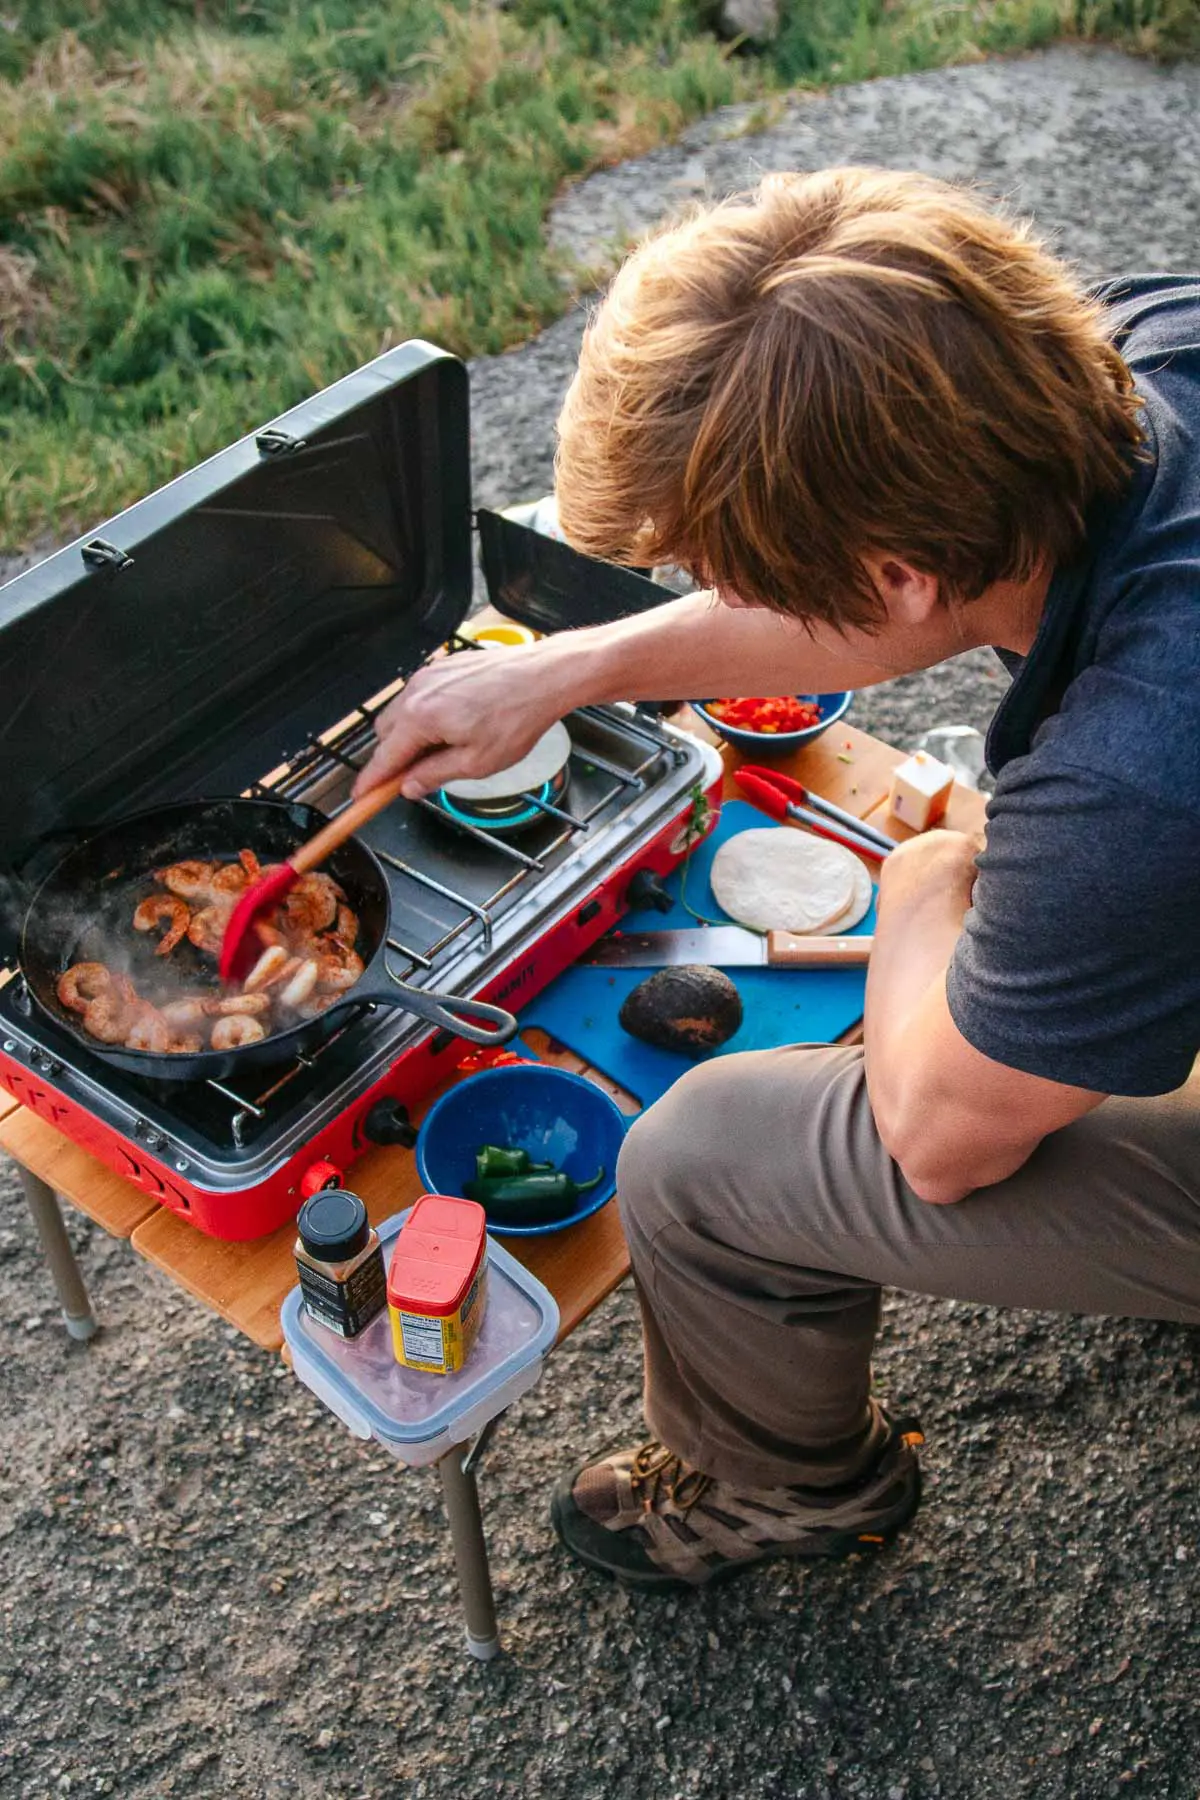 Michael cooking shrimp in a cast iron skillet on a camp stove.